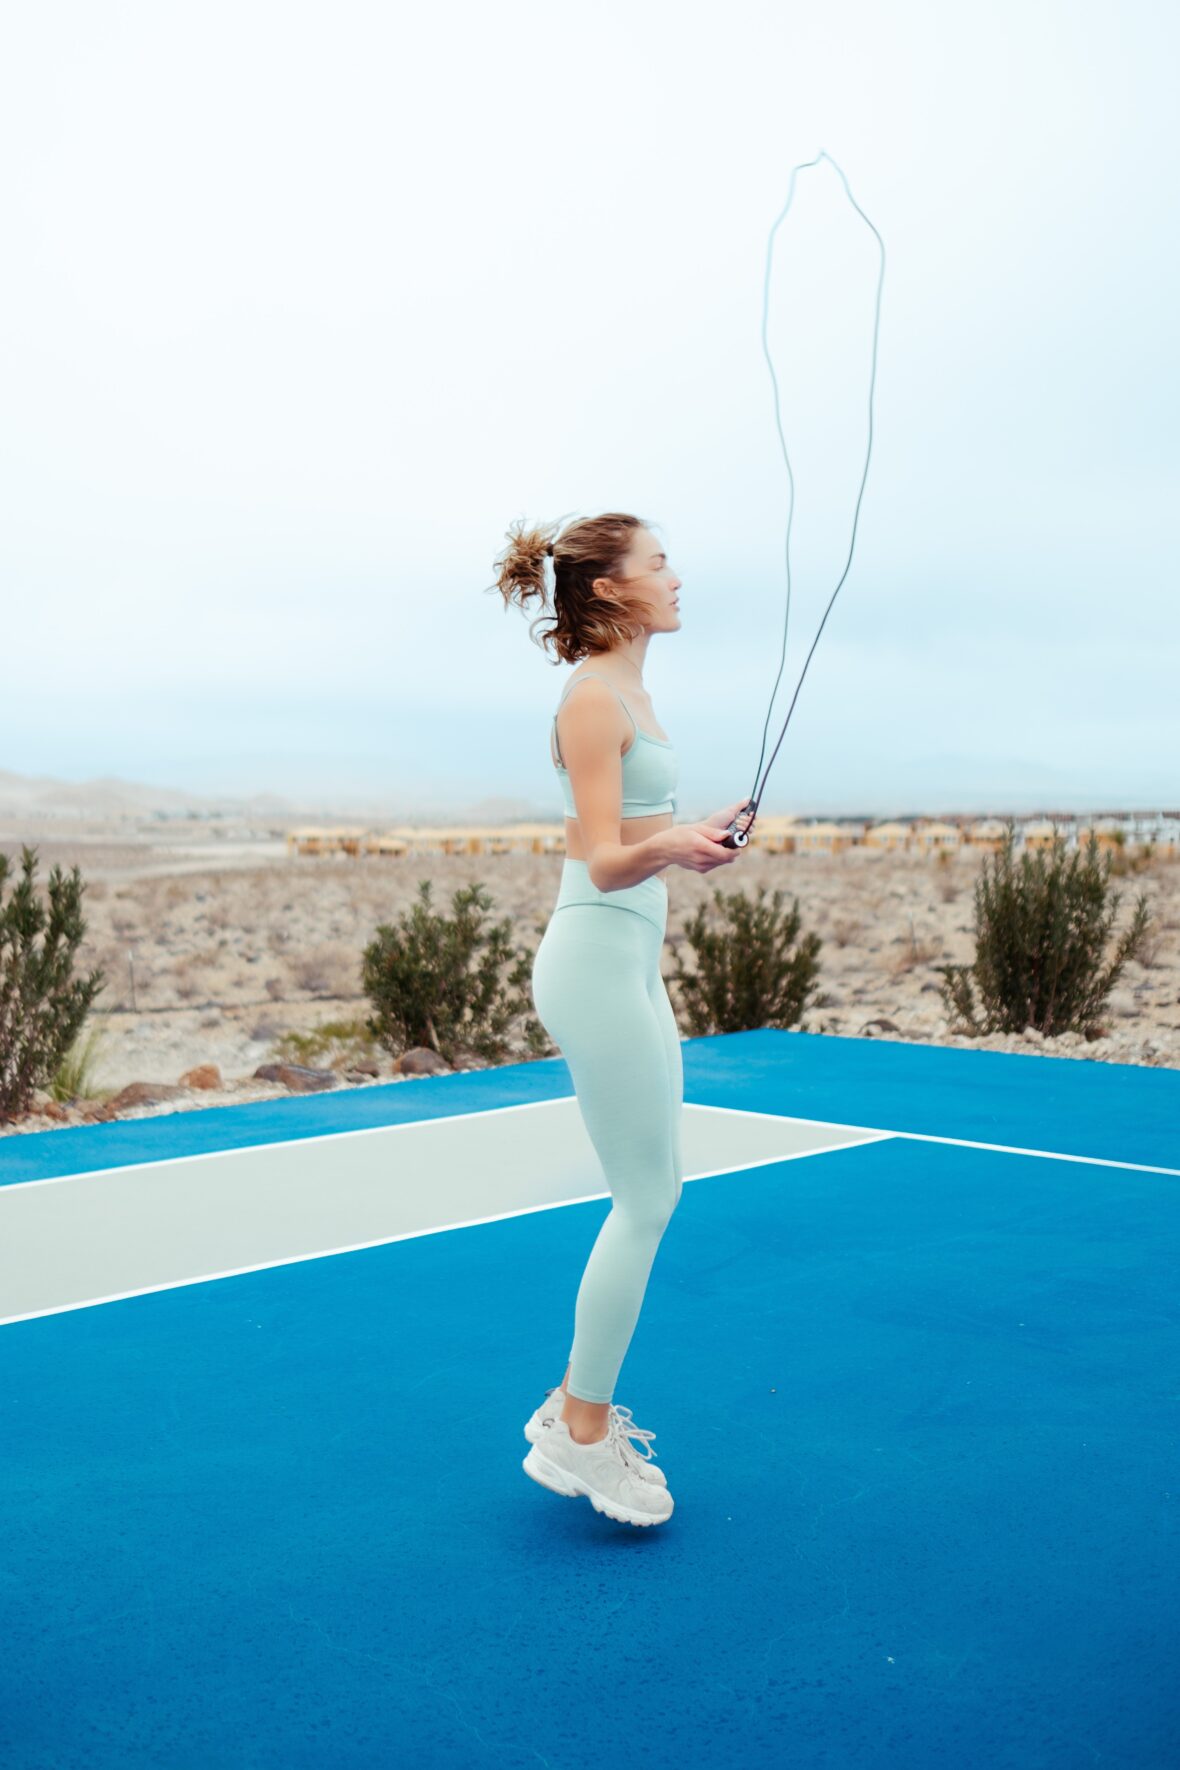 How to warm up before running: jump rope